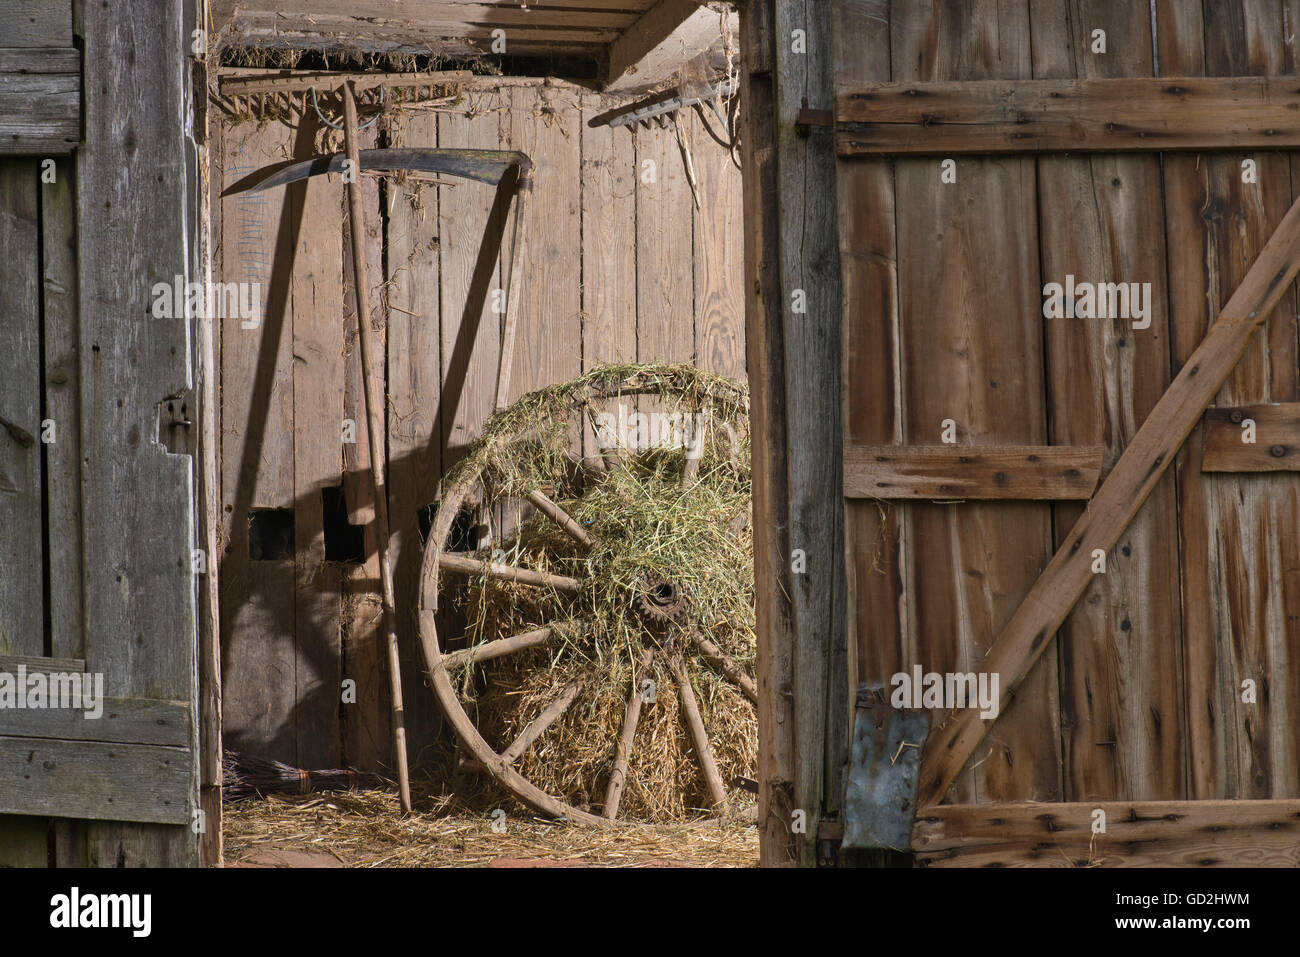 agriculture, barn, cartwheel from the 19th century, Bavaria, near Chams, Germany, wheel, wheels, scythe, scythes, barn door, barn doors, open, insight, insights, farm, farms, country life, agriculture, farming, wood, hovel, hovels, shack, shacks, barn floor, barn floors, agricultural, agrarian, appliances, tradition, traditions, still life, stilllife, rake, rakes, thing, things, barn, barns, cartwheel, cartwheels, historic, historical, Additional-Rights-Clearences-Not Available Stock Photo